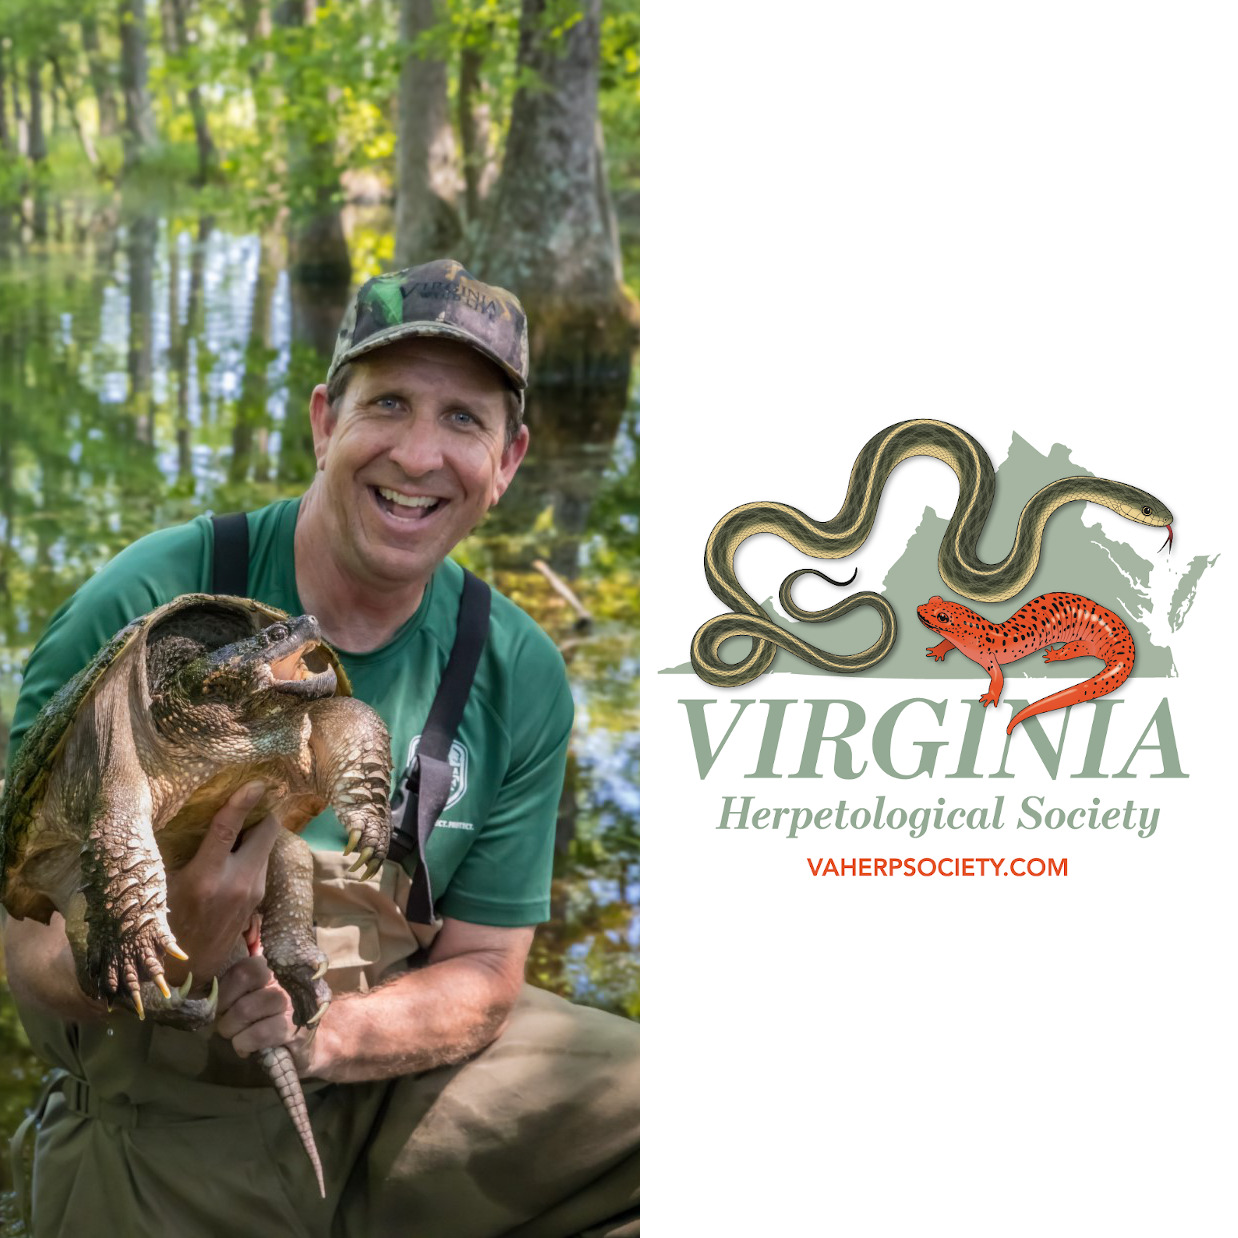 JD Kleopfer holding a turtle and the Virginia Herpetological Society logo